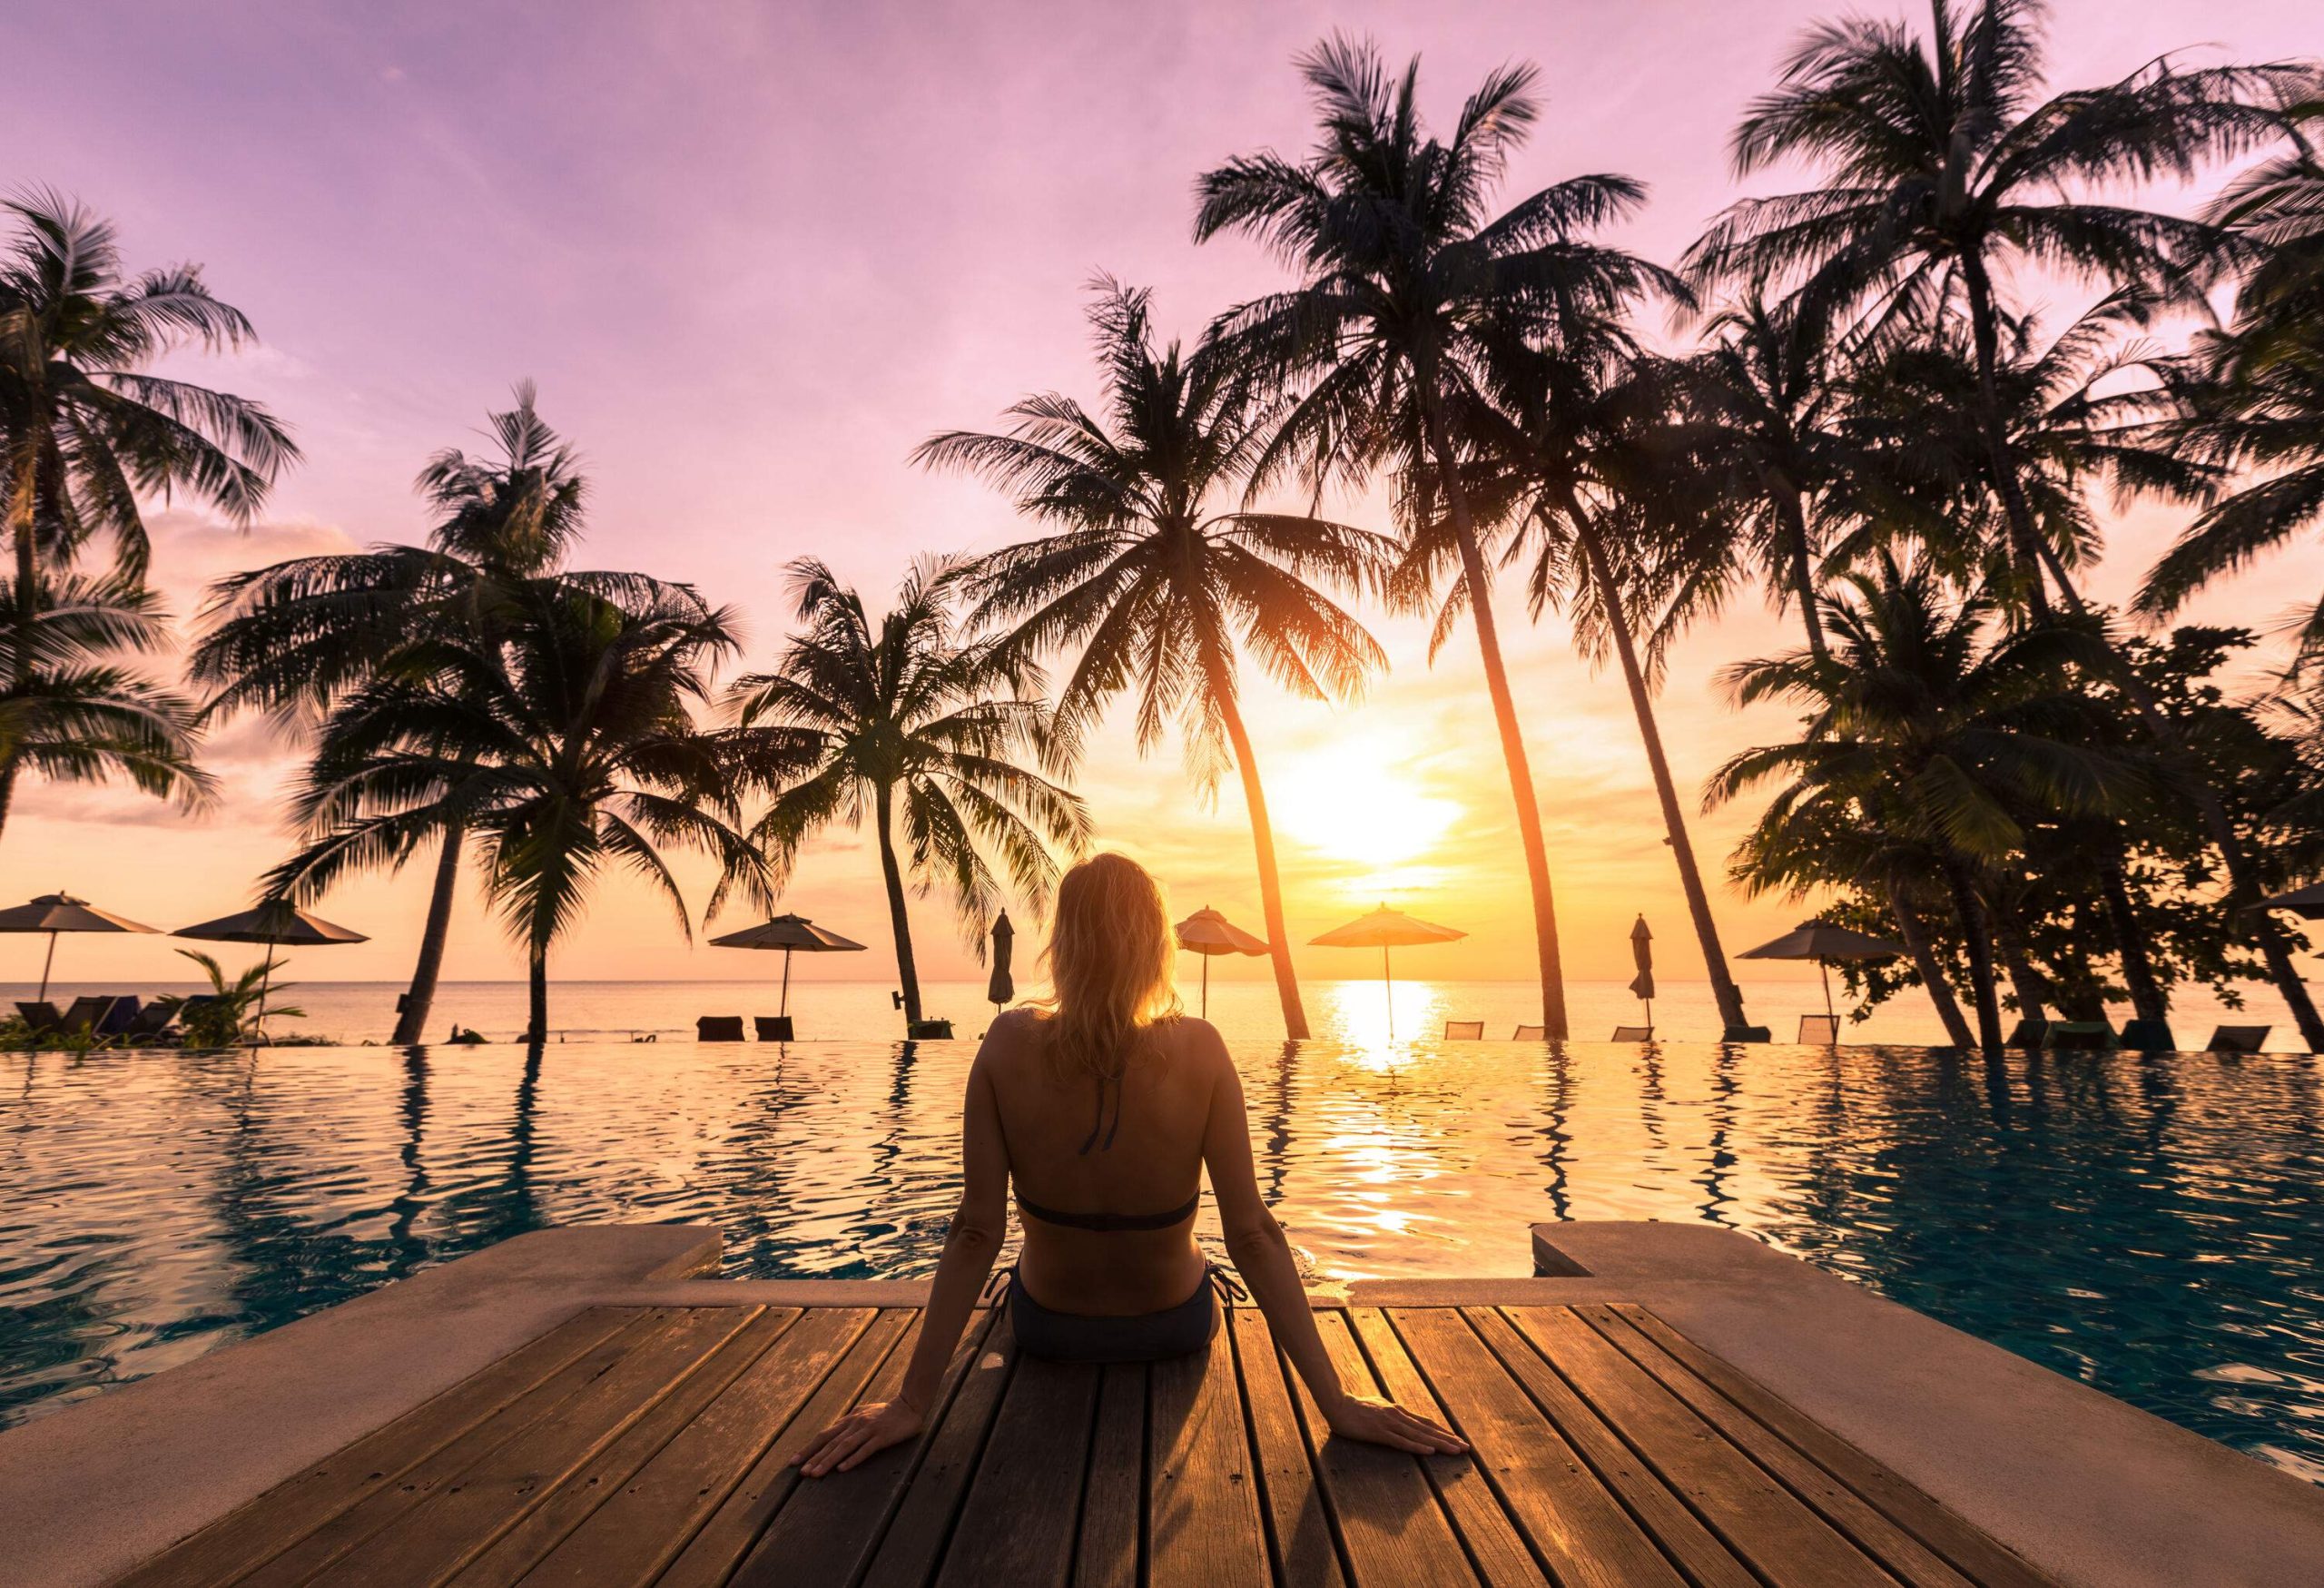 A woman sits on the deck of an infinity pool overlooking the tall palm trees on the beach against the scenic sunset.